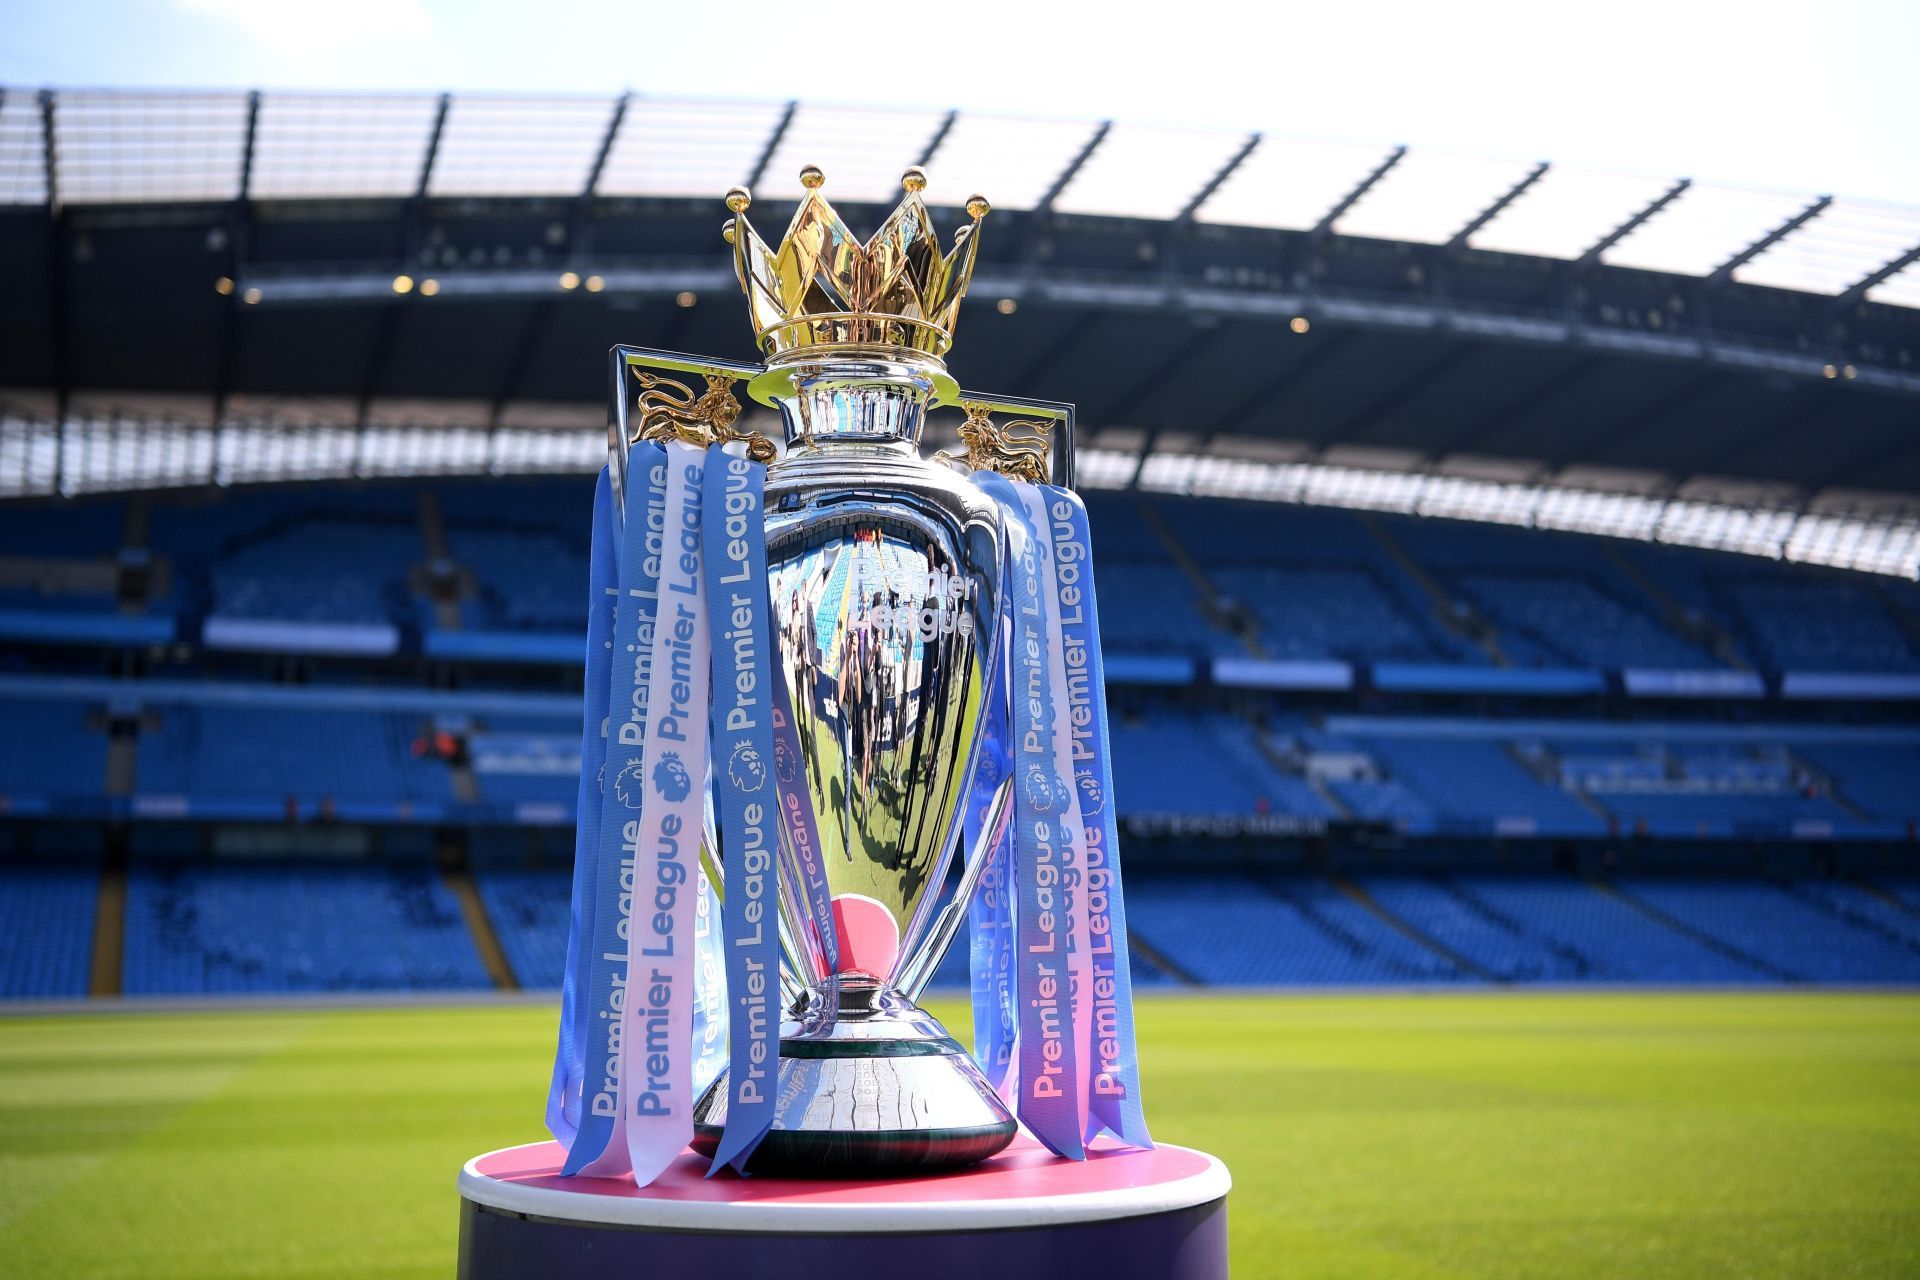 The Premier League is the most popular league in the world